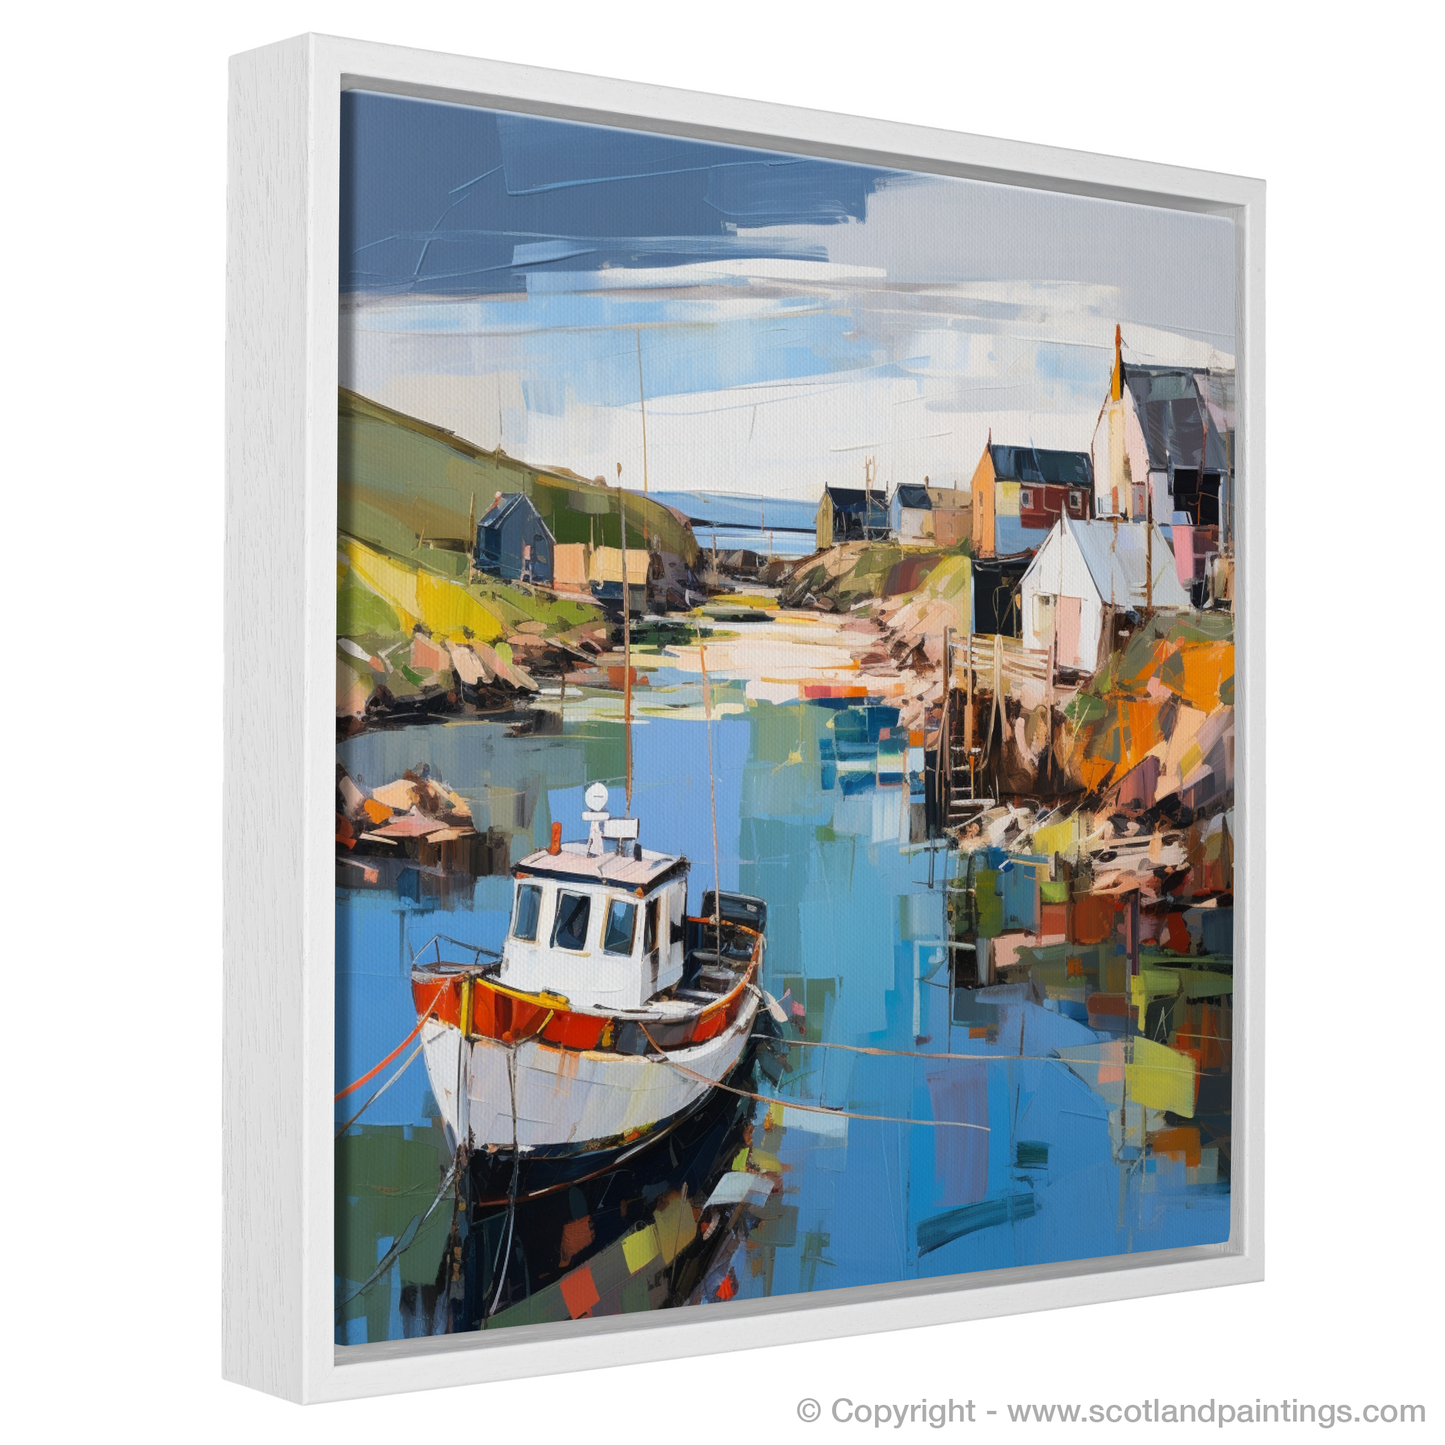 Painting and Art Print of Whitehills Harbour, Aberdeenshire entitled "Vibrant Echoes of Whitehills Harbour".